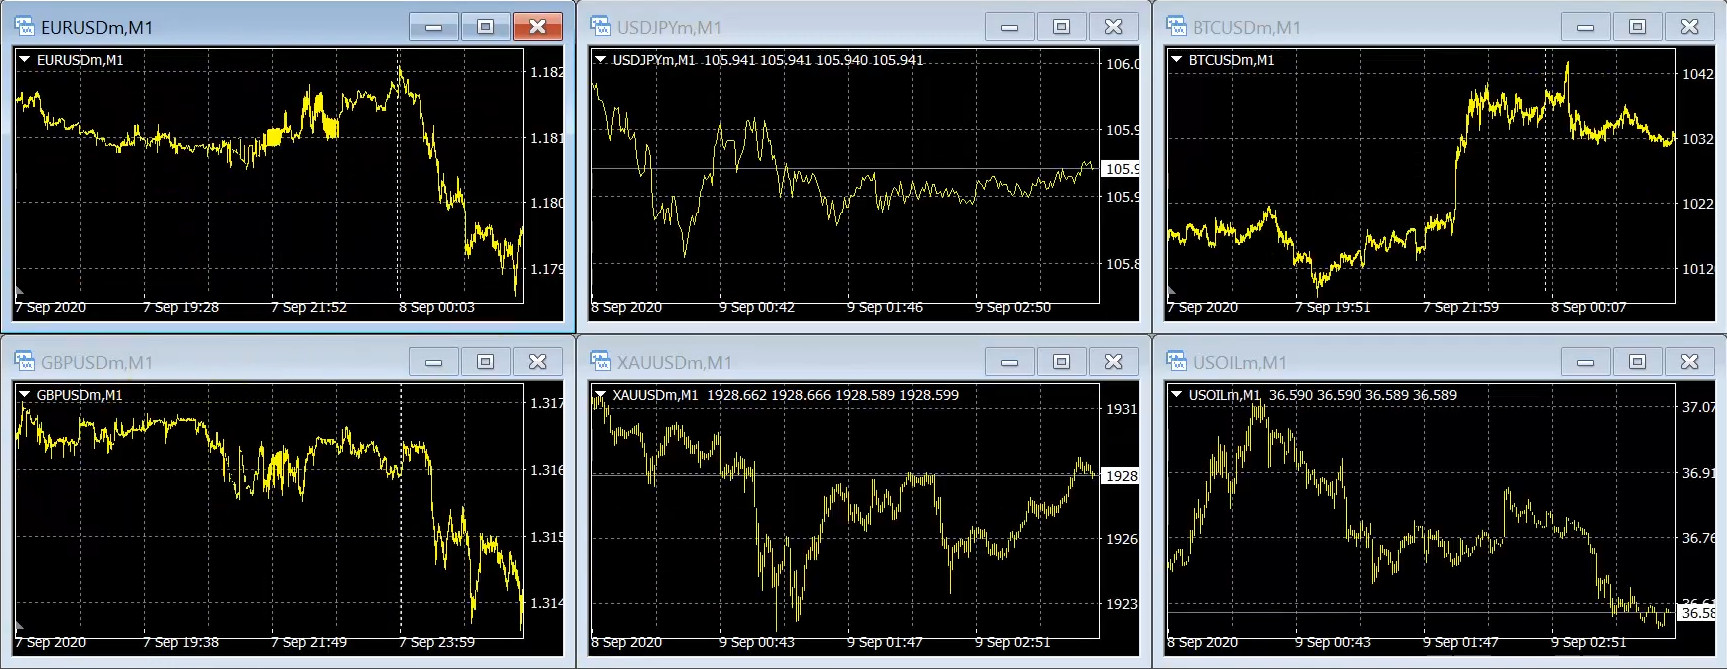 Main screen of the MetaTrader 4 software on Exness